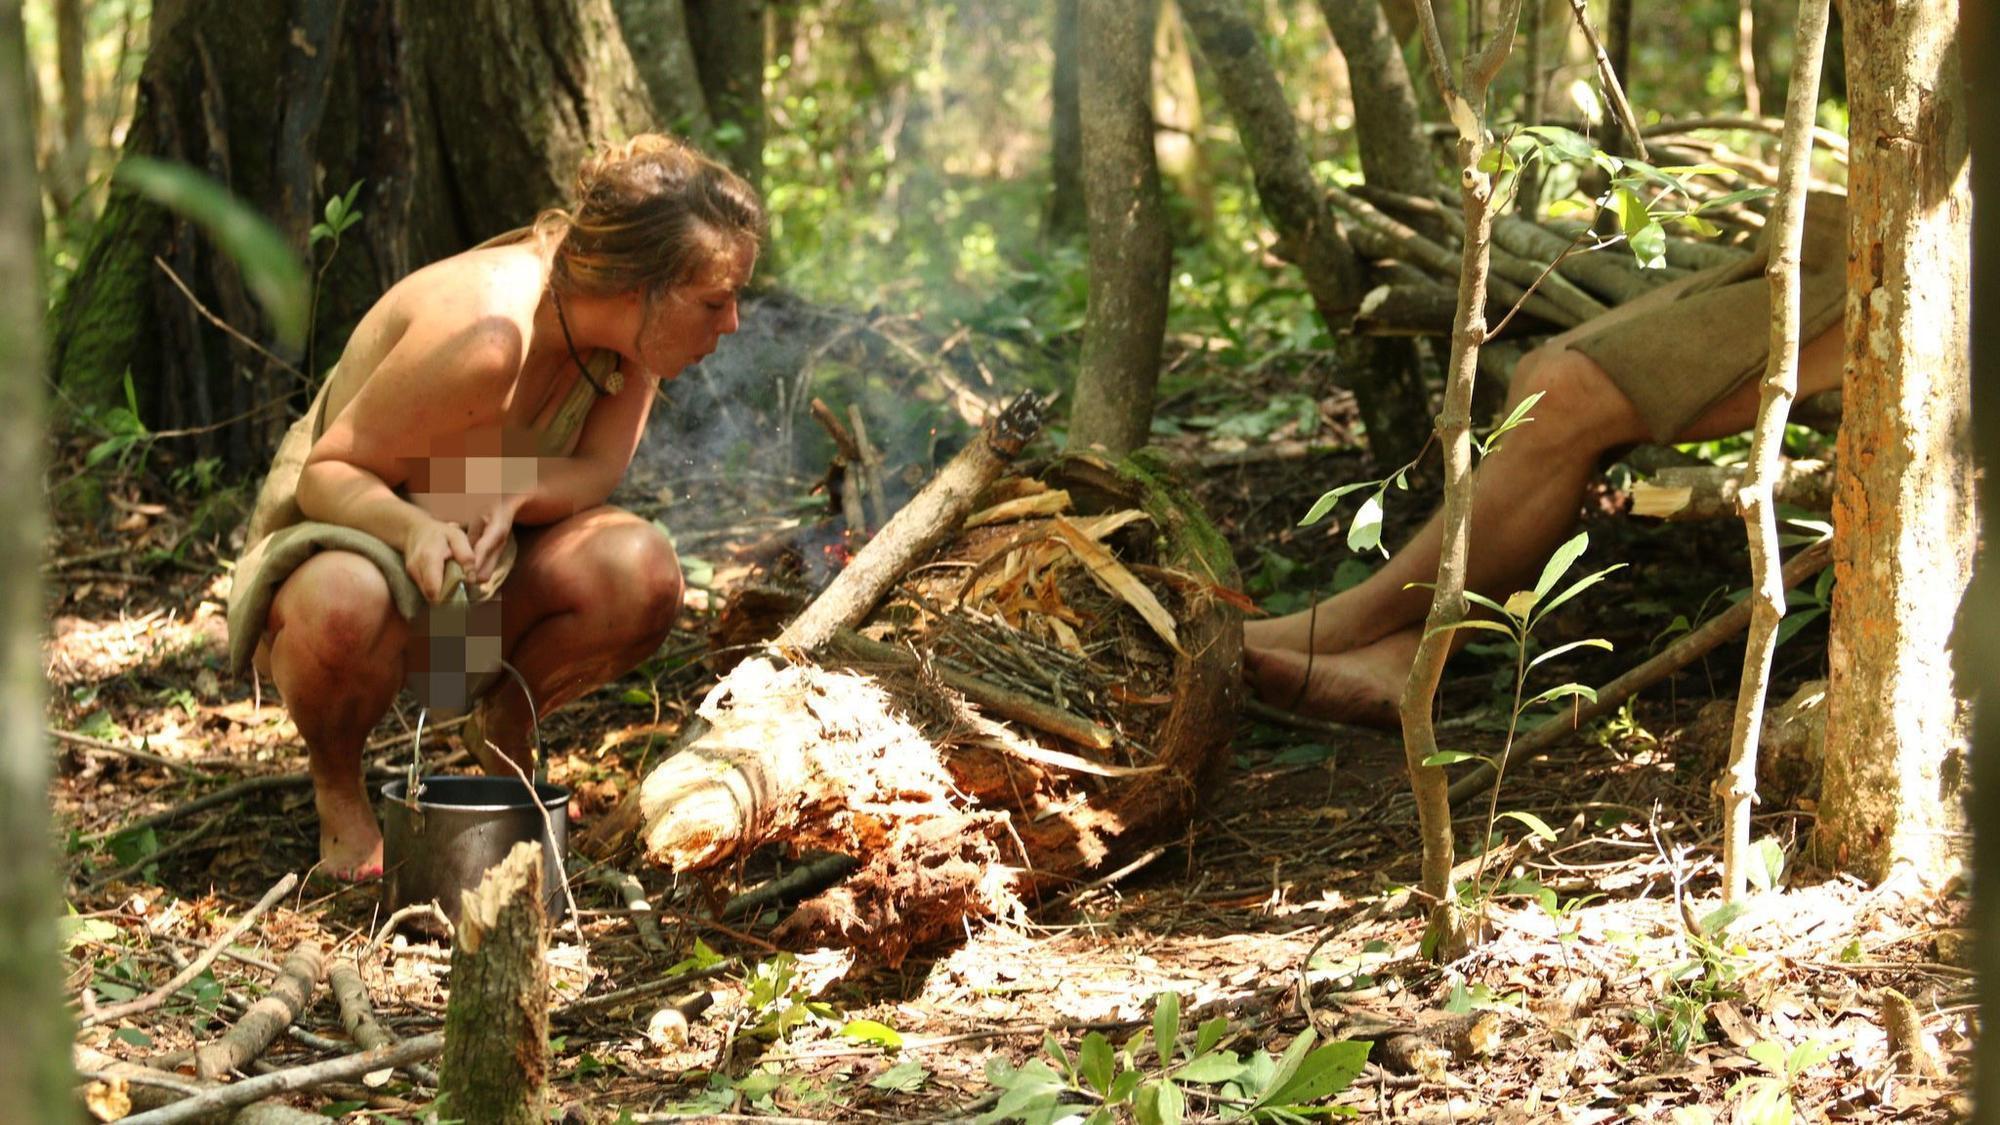 “Westminster woman to compete on 'Naked and Afraid' for a s...